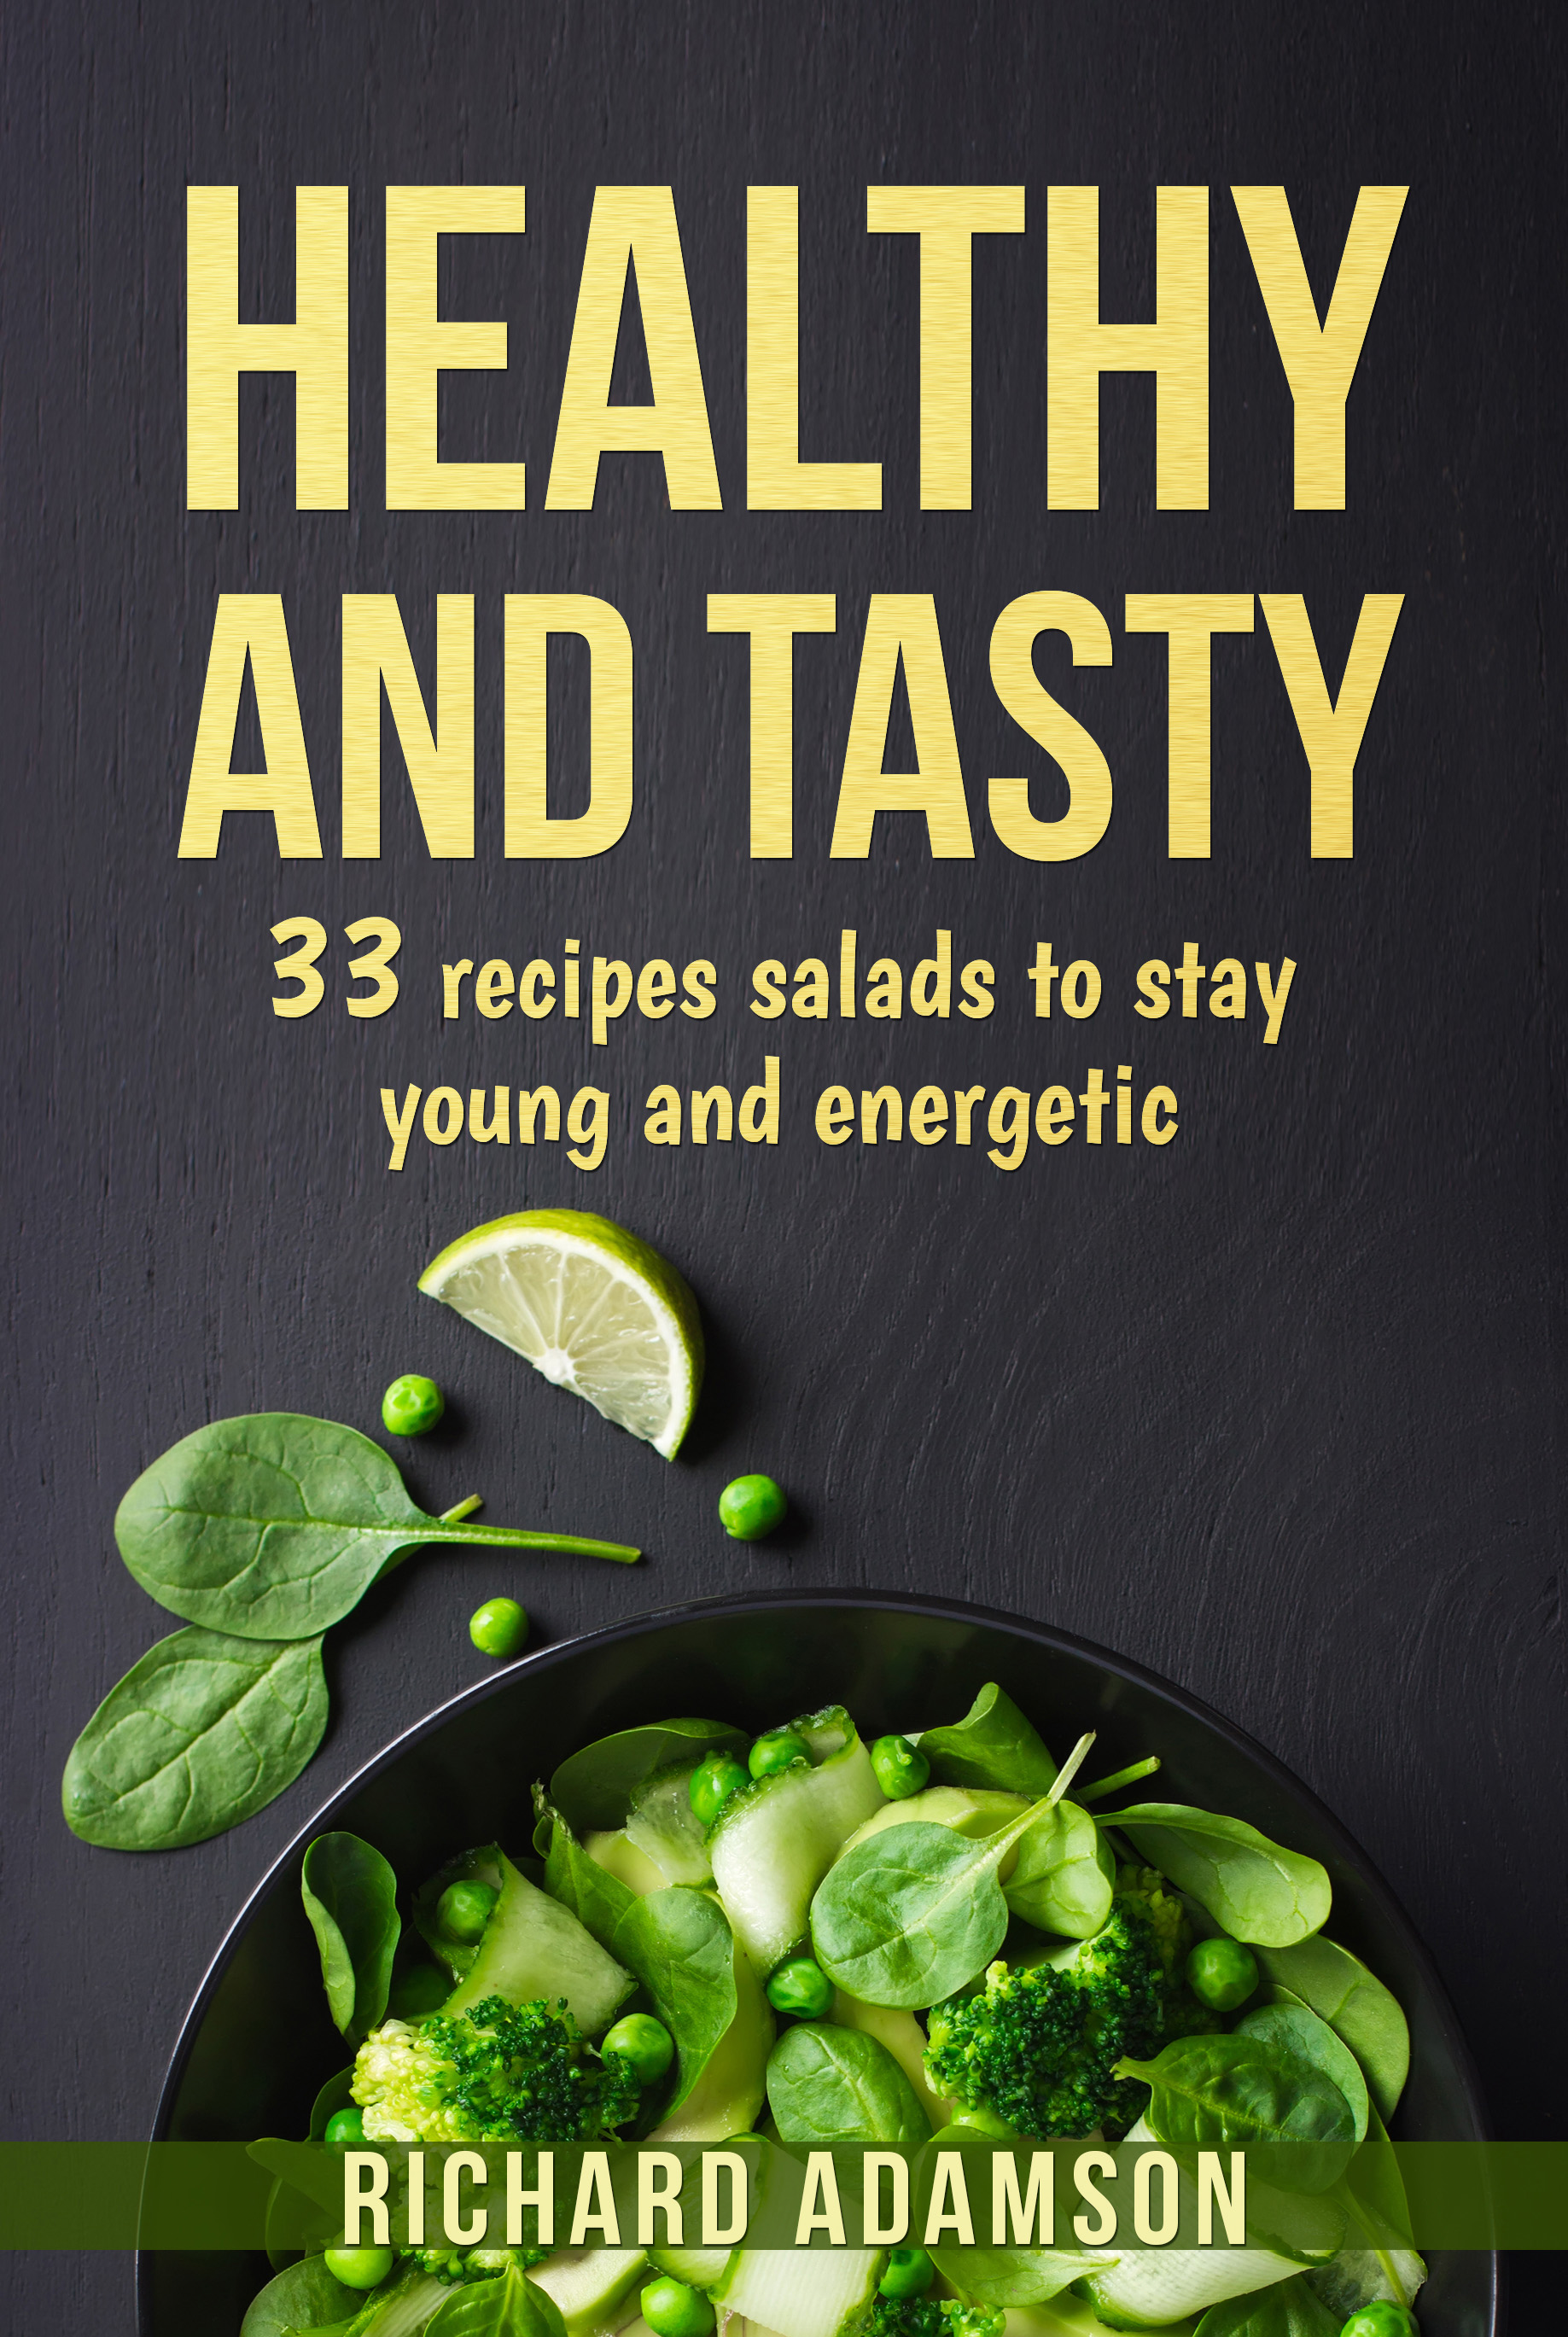 FREE: HEALTHY AND TASTY: 33 recipes salads to stay young and energetic by Richard Adamson